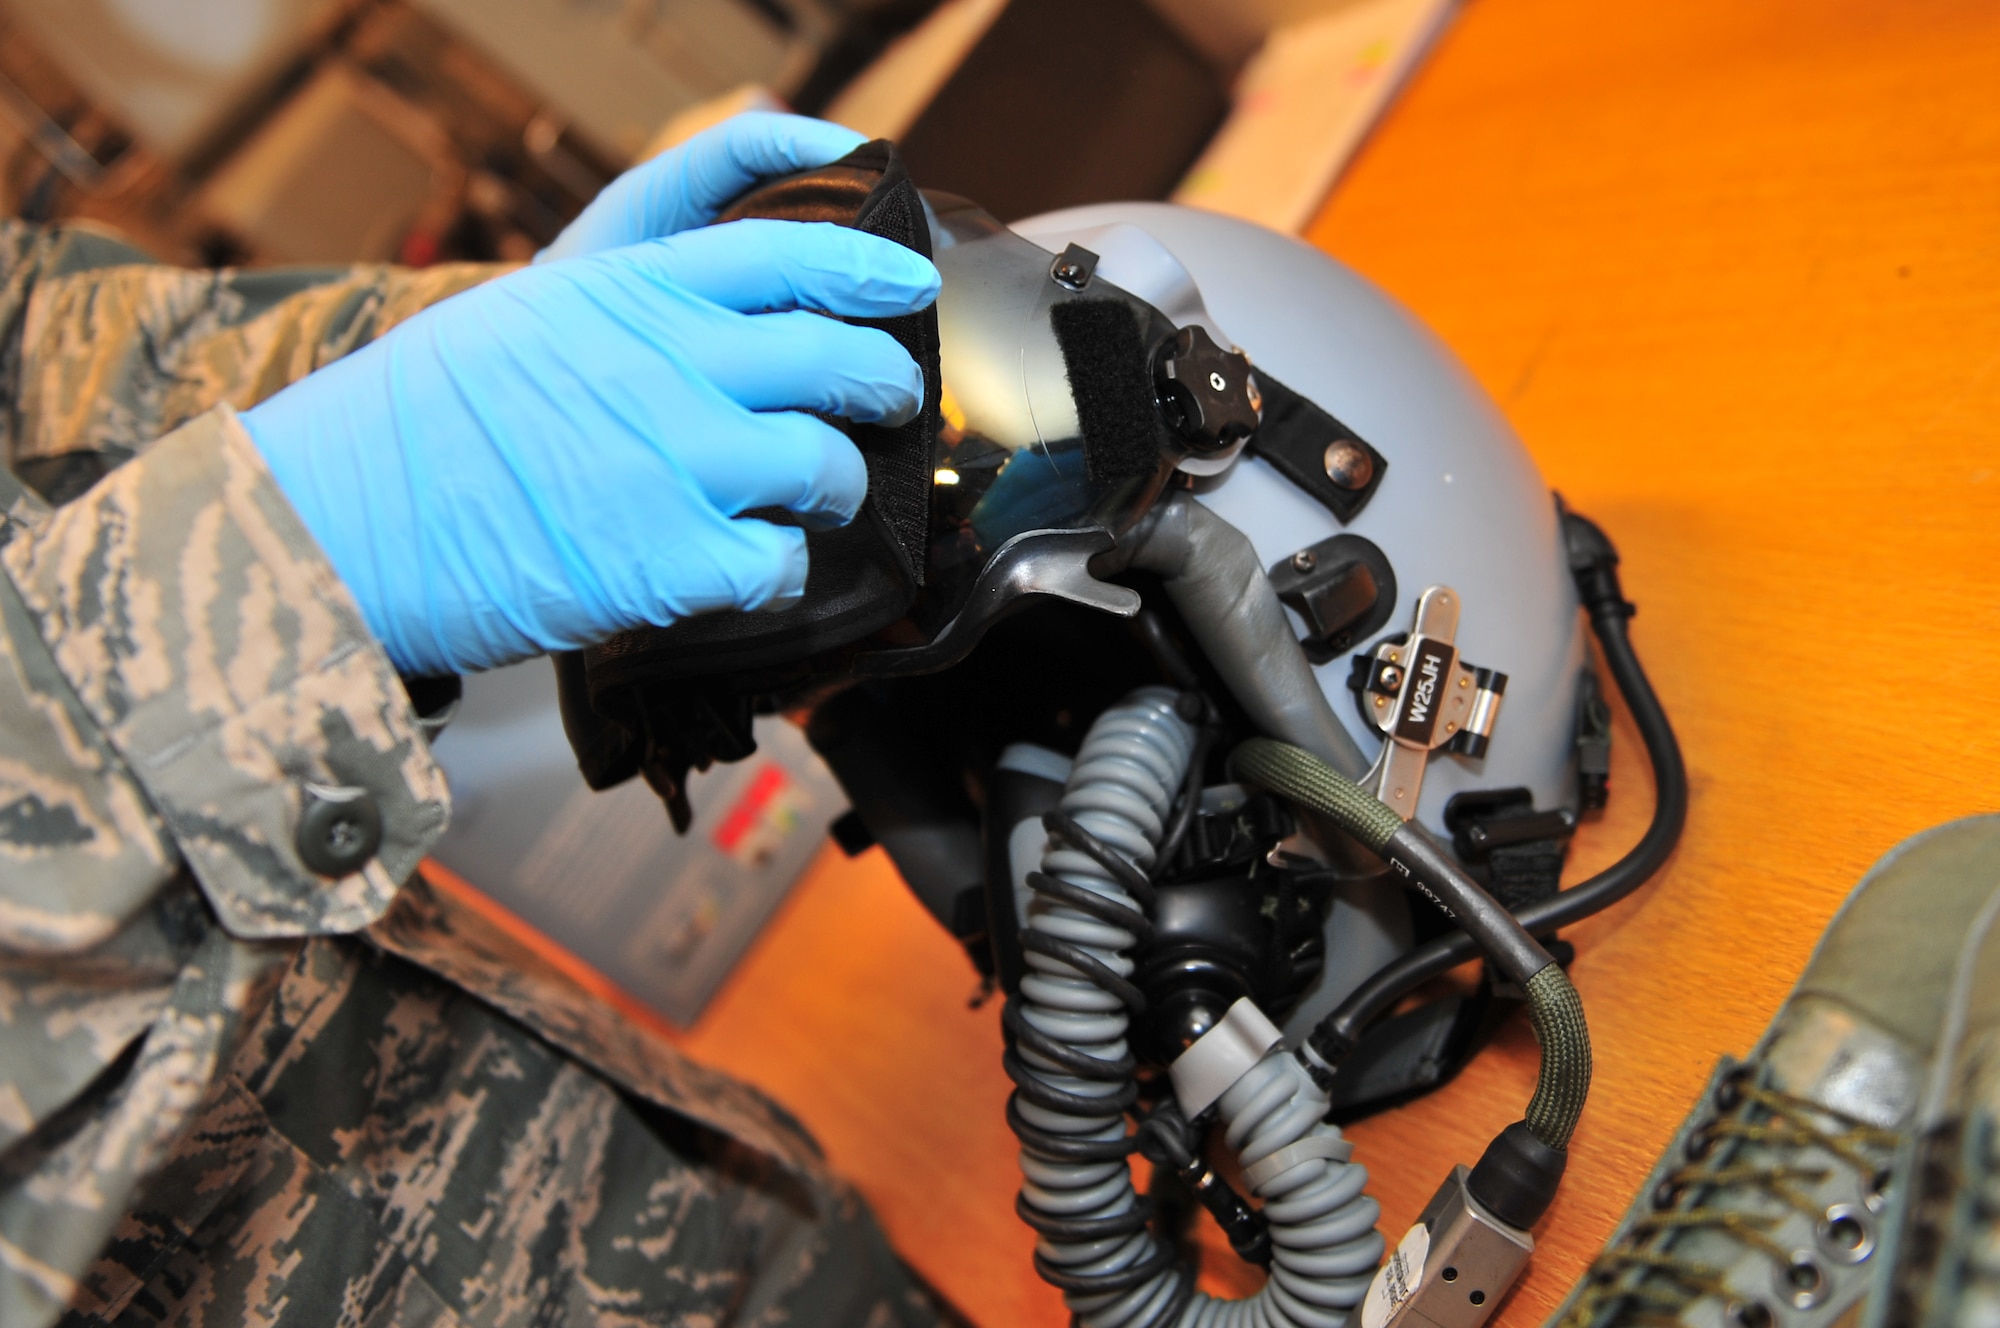 KALLAX AIR BASE, Sweden -- Airman 1st Class Niall Spradley, 52nd Operations Support Squadron, attaches a visor to a heads up display on a pilot's helmet here Sept. 4 before flight in support of the Nordic Air Meet 2012. The multinational training exercise brought together more than 50 aircraft from the U.S., Great Britain, Denmark, Finland, Switzerland and Sweden to participate in tactical role-playing training missions. The three week exercise enabled the different nations to exchange aerial tactics and capabilities to improve combat power effectiveness in solo and joint environments while building and strengthening international partnerships. (U.S. Air Force Photo by Airman 1st Class Dillon Davis/Released)